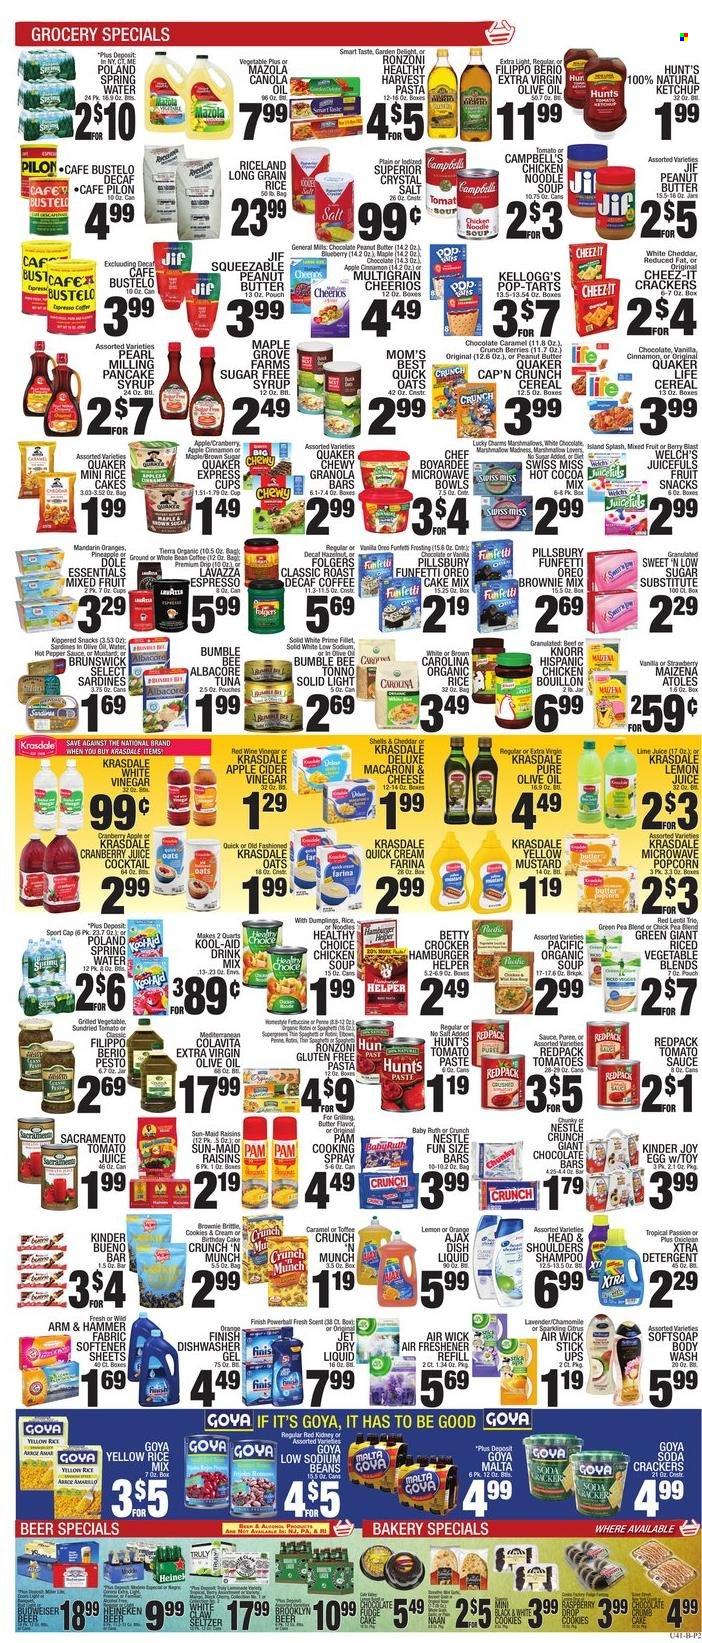 thumbnail - C-Town Flyer - 01/14/2022 - 01/20/2022 - Sales products - brownie mix, cake mix, Dole, mandarines, pineapple, Welch's, sardines, tuna, Campbell's, macaroni & cheese, soup, hamburger, pasta, Bumble Bee, Knorr, Pillsbury, dumplings, Quaker, noodles, Oreo, Swiss Miss, eggs, cookies, Nestlé, crackers, Kellogg's, Kinder Bueno, Pop-Tarts, fruit snack, popcorn, Cheez-It, ARM & HAMMER, bouillon, frosting, oats, Maizena, tomato paste, tomato sauce, Goya, cereals, Cheerios, granola bar, Cap'n Crunch, long grain rice, pepper, cinnamon, mustard, ketchup, pesto, apple cider vinegar, canola oil, cooking spray, extra virgin olive oil, vinegar, olive oil, oil, peanut butter, pancake syrup, syrup, Jif, raisins, dried fruit, cranberry juice, tomato juice, spring water, soda, lemon juice, hot cocoa, coffee, Folgers, beer, Heineken. Page 2.